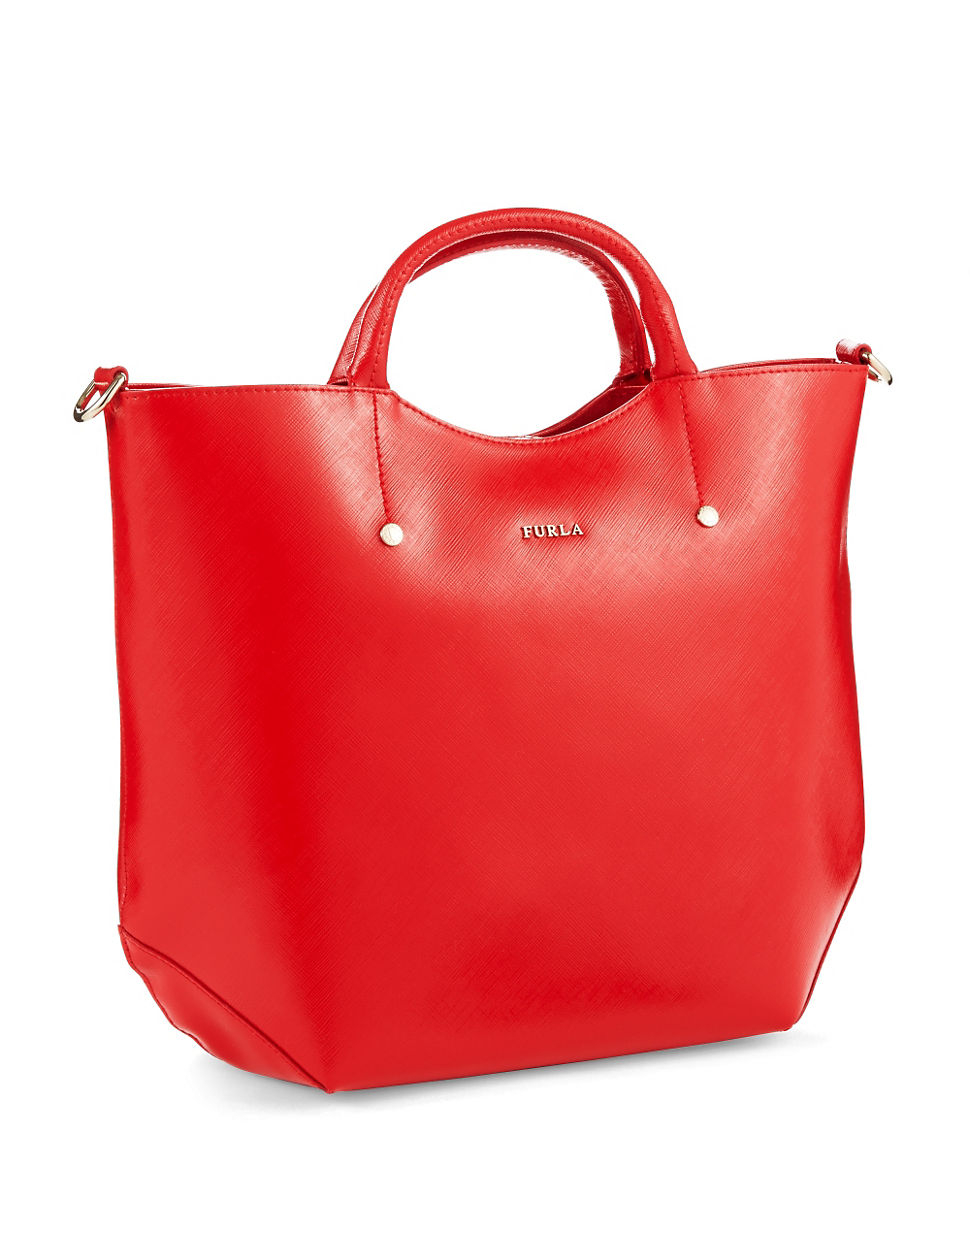 Furla Alissa Leather Tote Bag in Red - Lyst